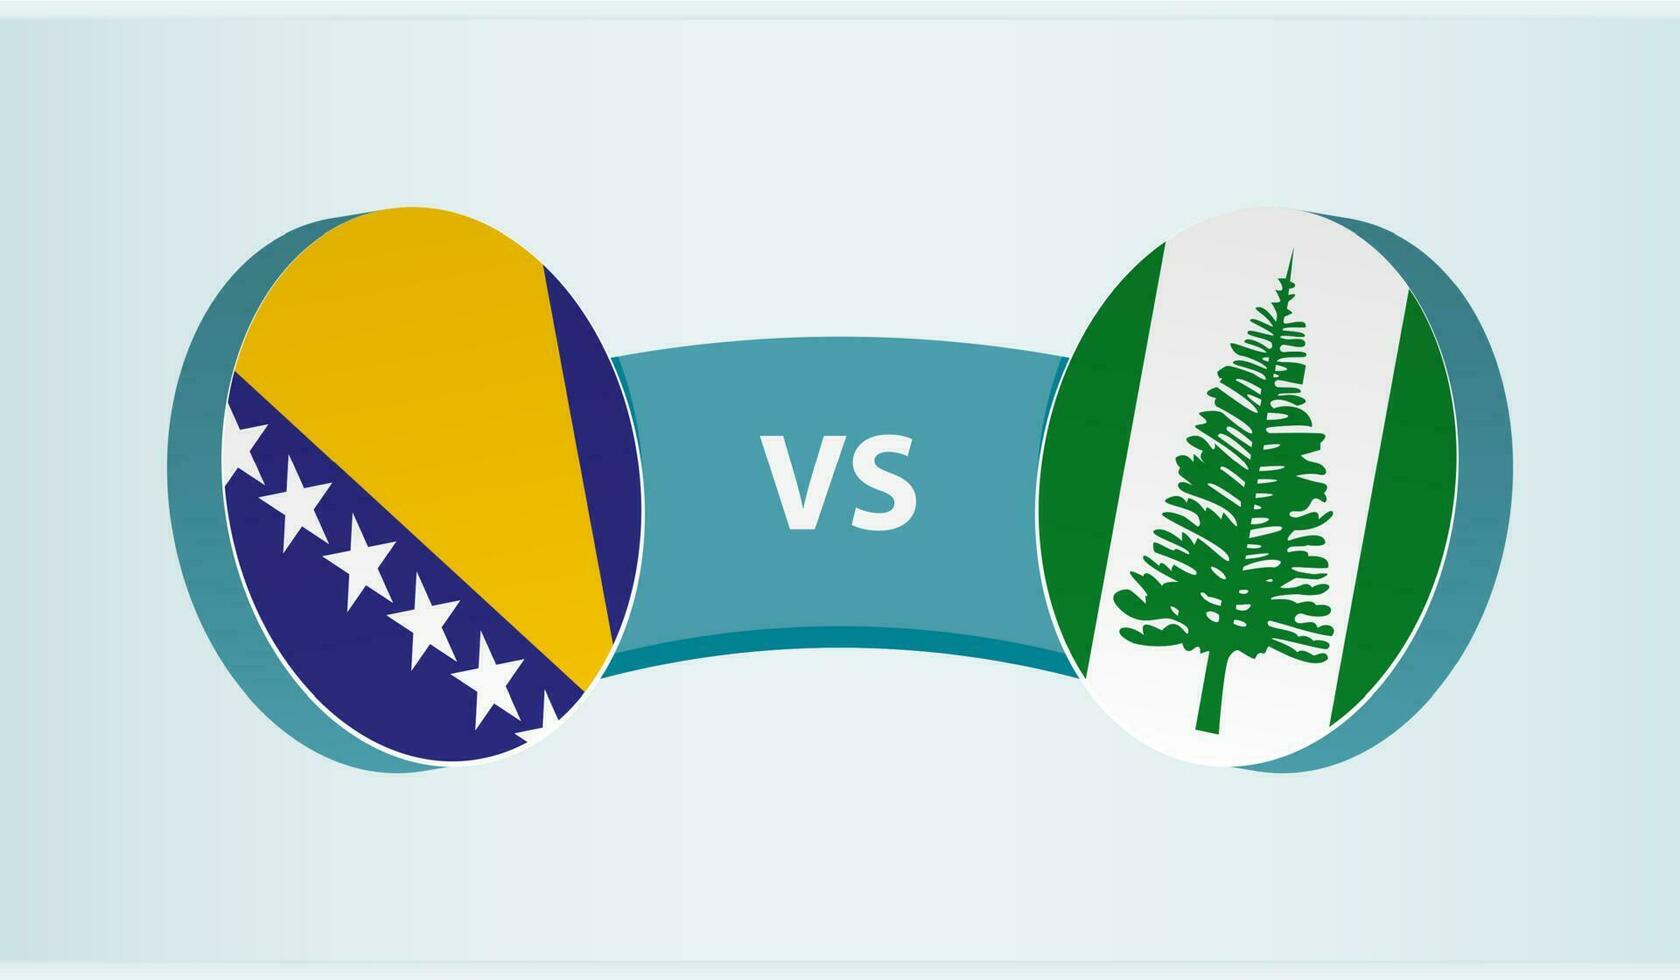 Bosnia and Herzegovina versus Norfolk Island, team sports competition concept. vector